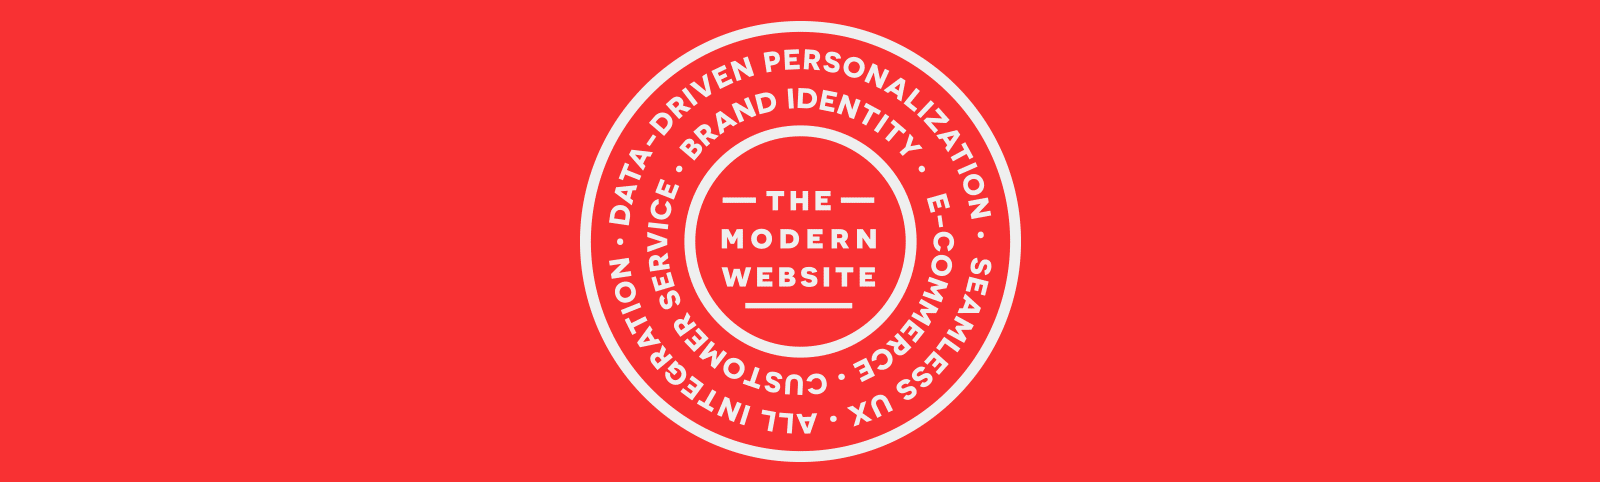 the-modern-website-process-graphic